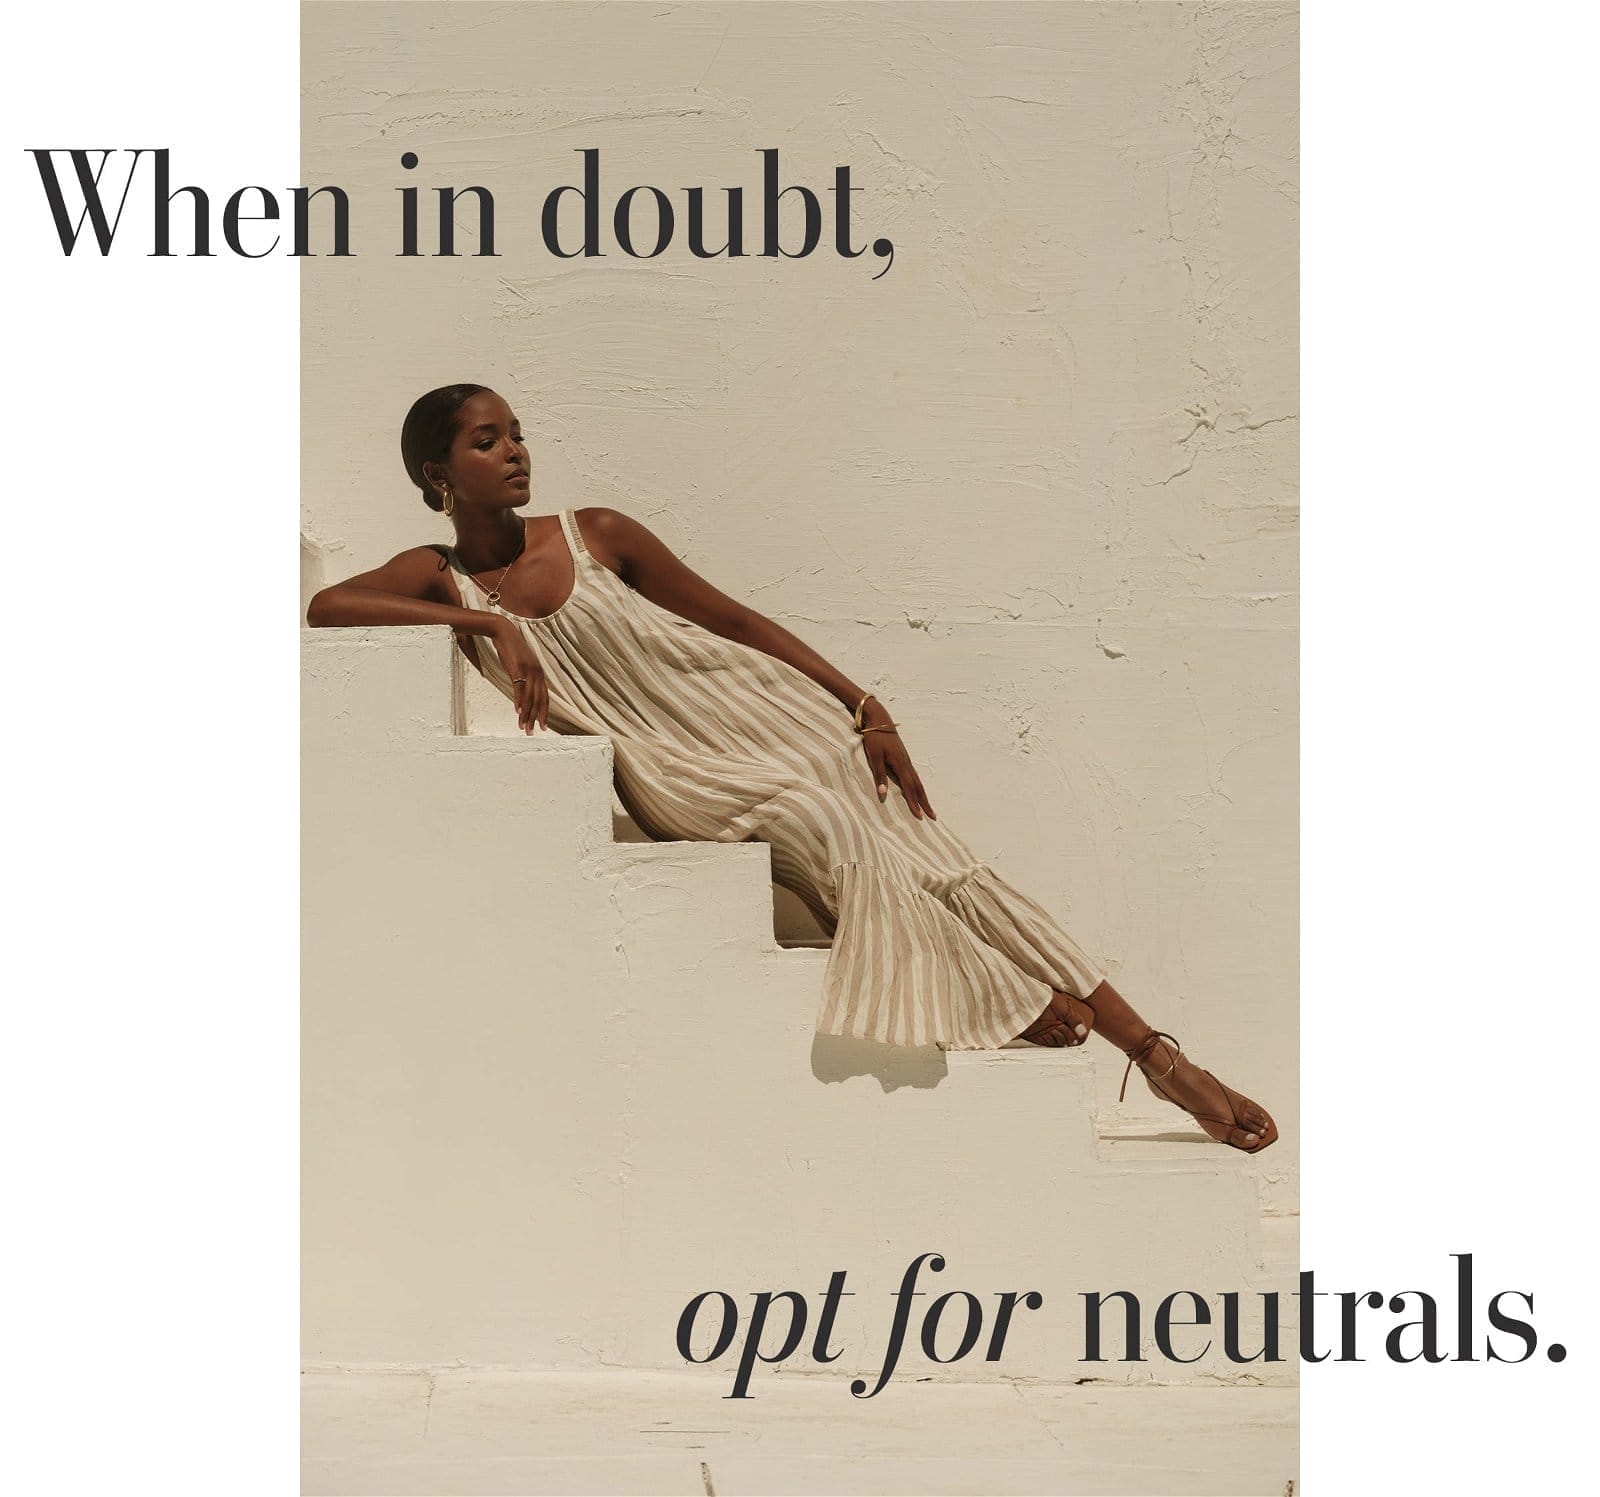 When in doubt, opt for neutrals.